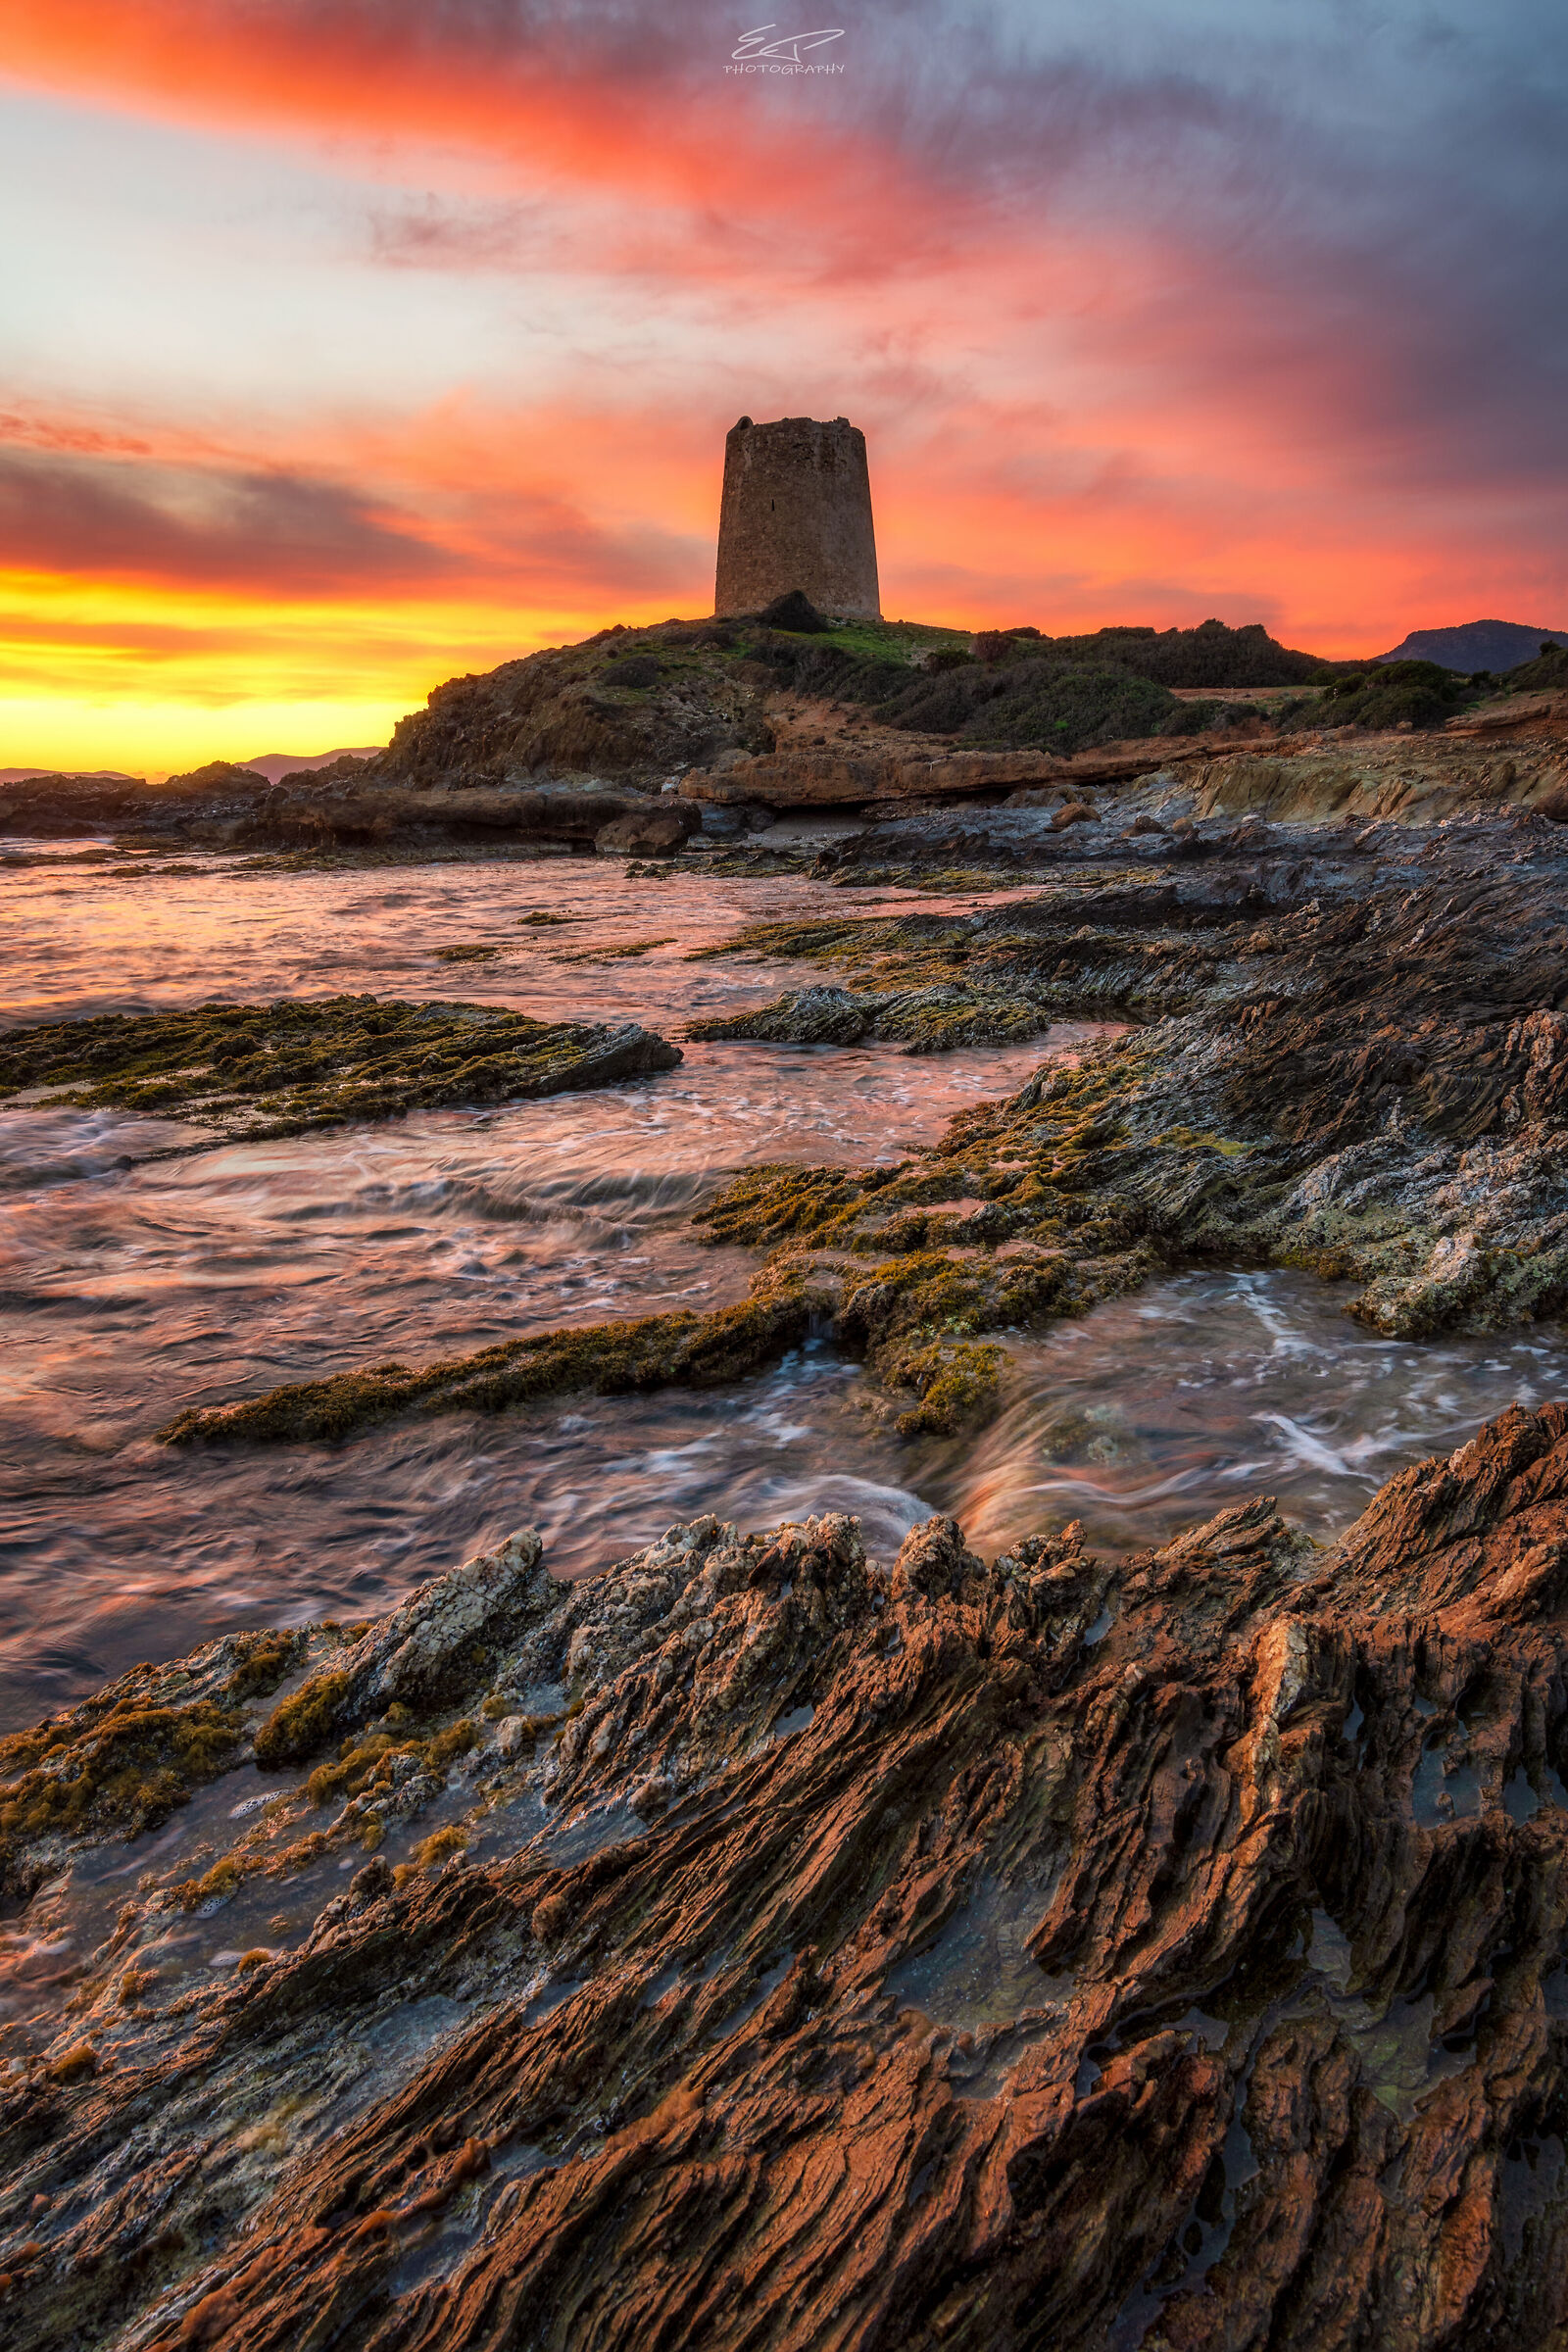 Sunset at the Coastal Tower of Pixinni....